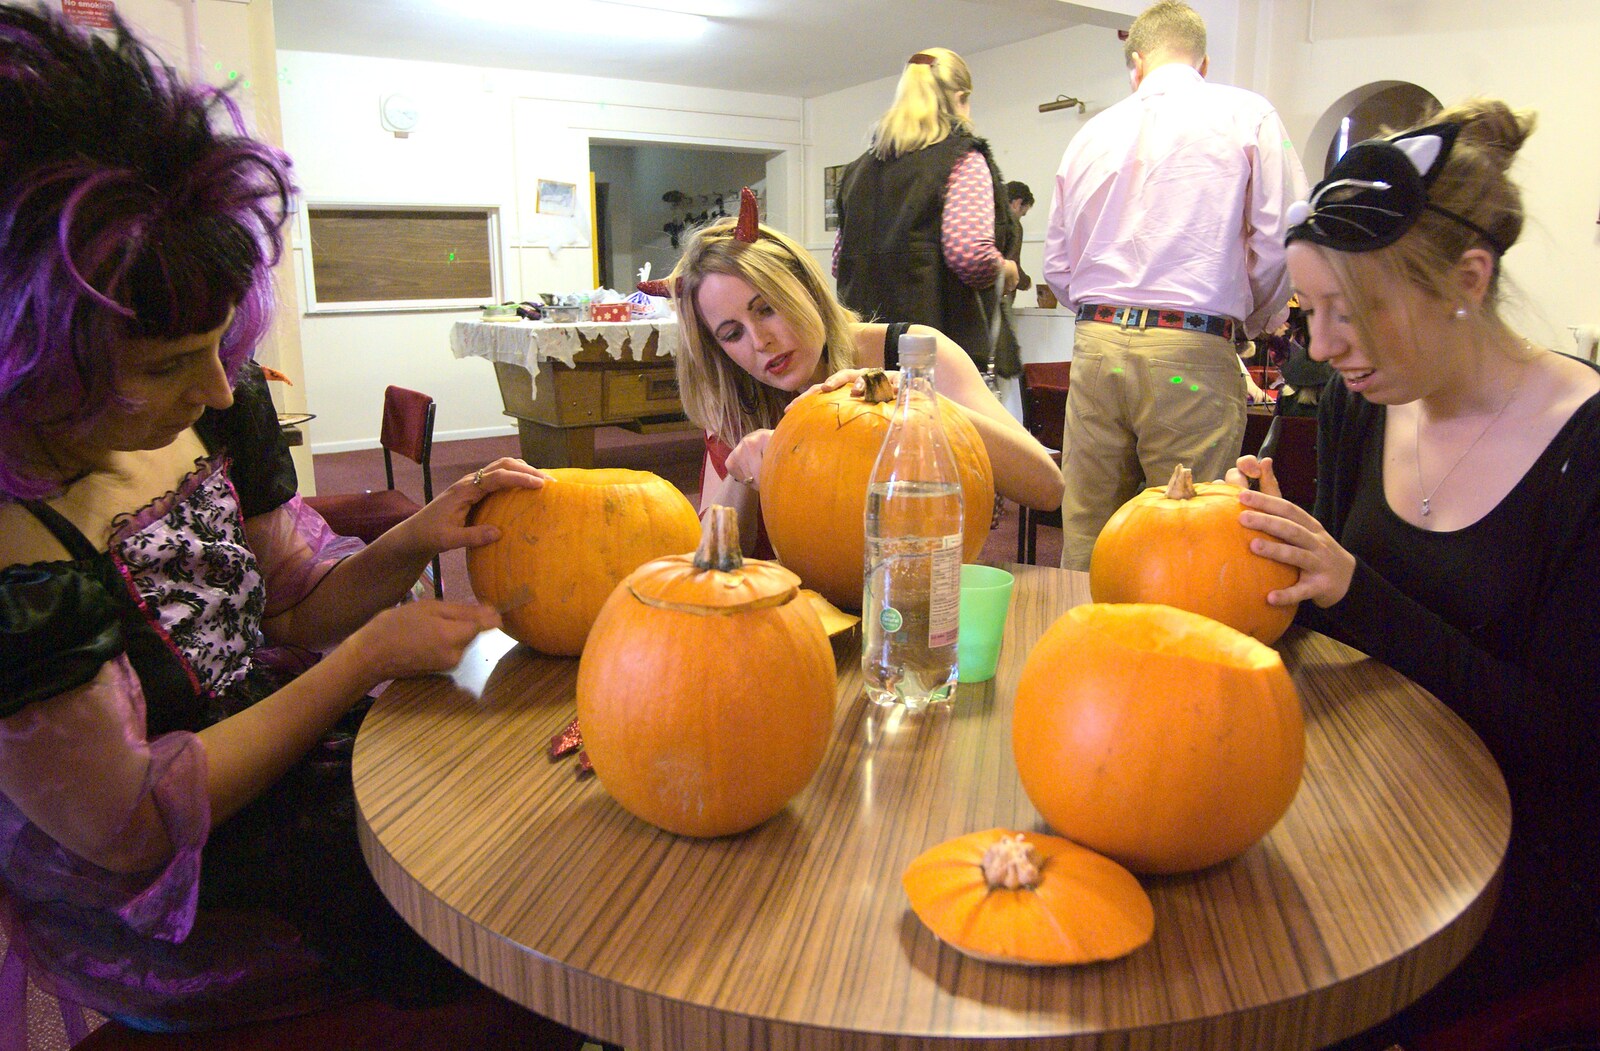 More intense pumpkin-carving action from Amelia's Birthday, Brome Village Hall, Suffolk - 29th October 2011